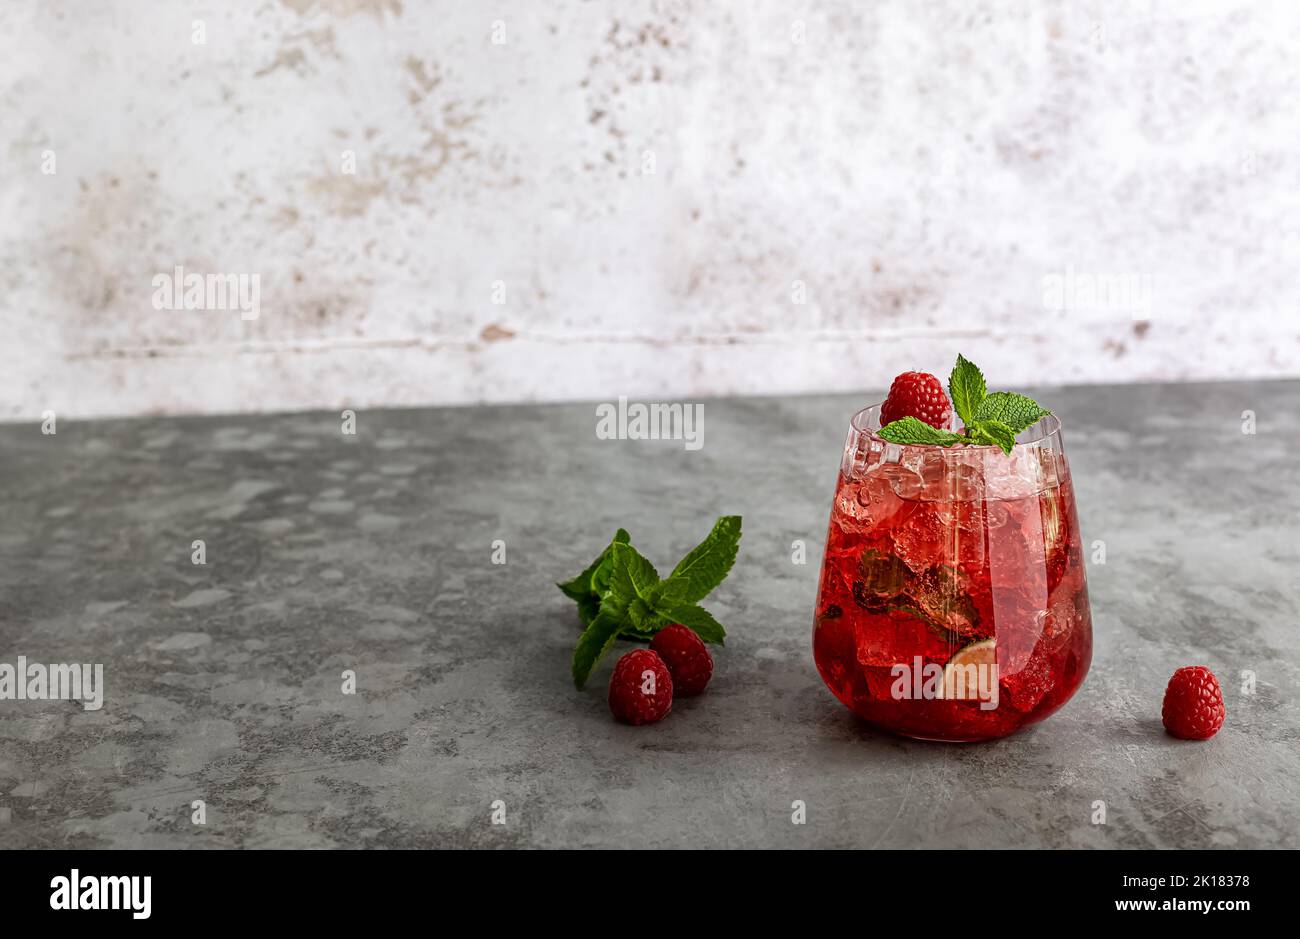 A glass of raspberry daiquiri, alcoholic cocktail or mocktail with raspberry, soda water, lime juice. Stock Photo